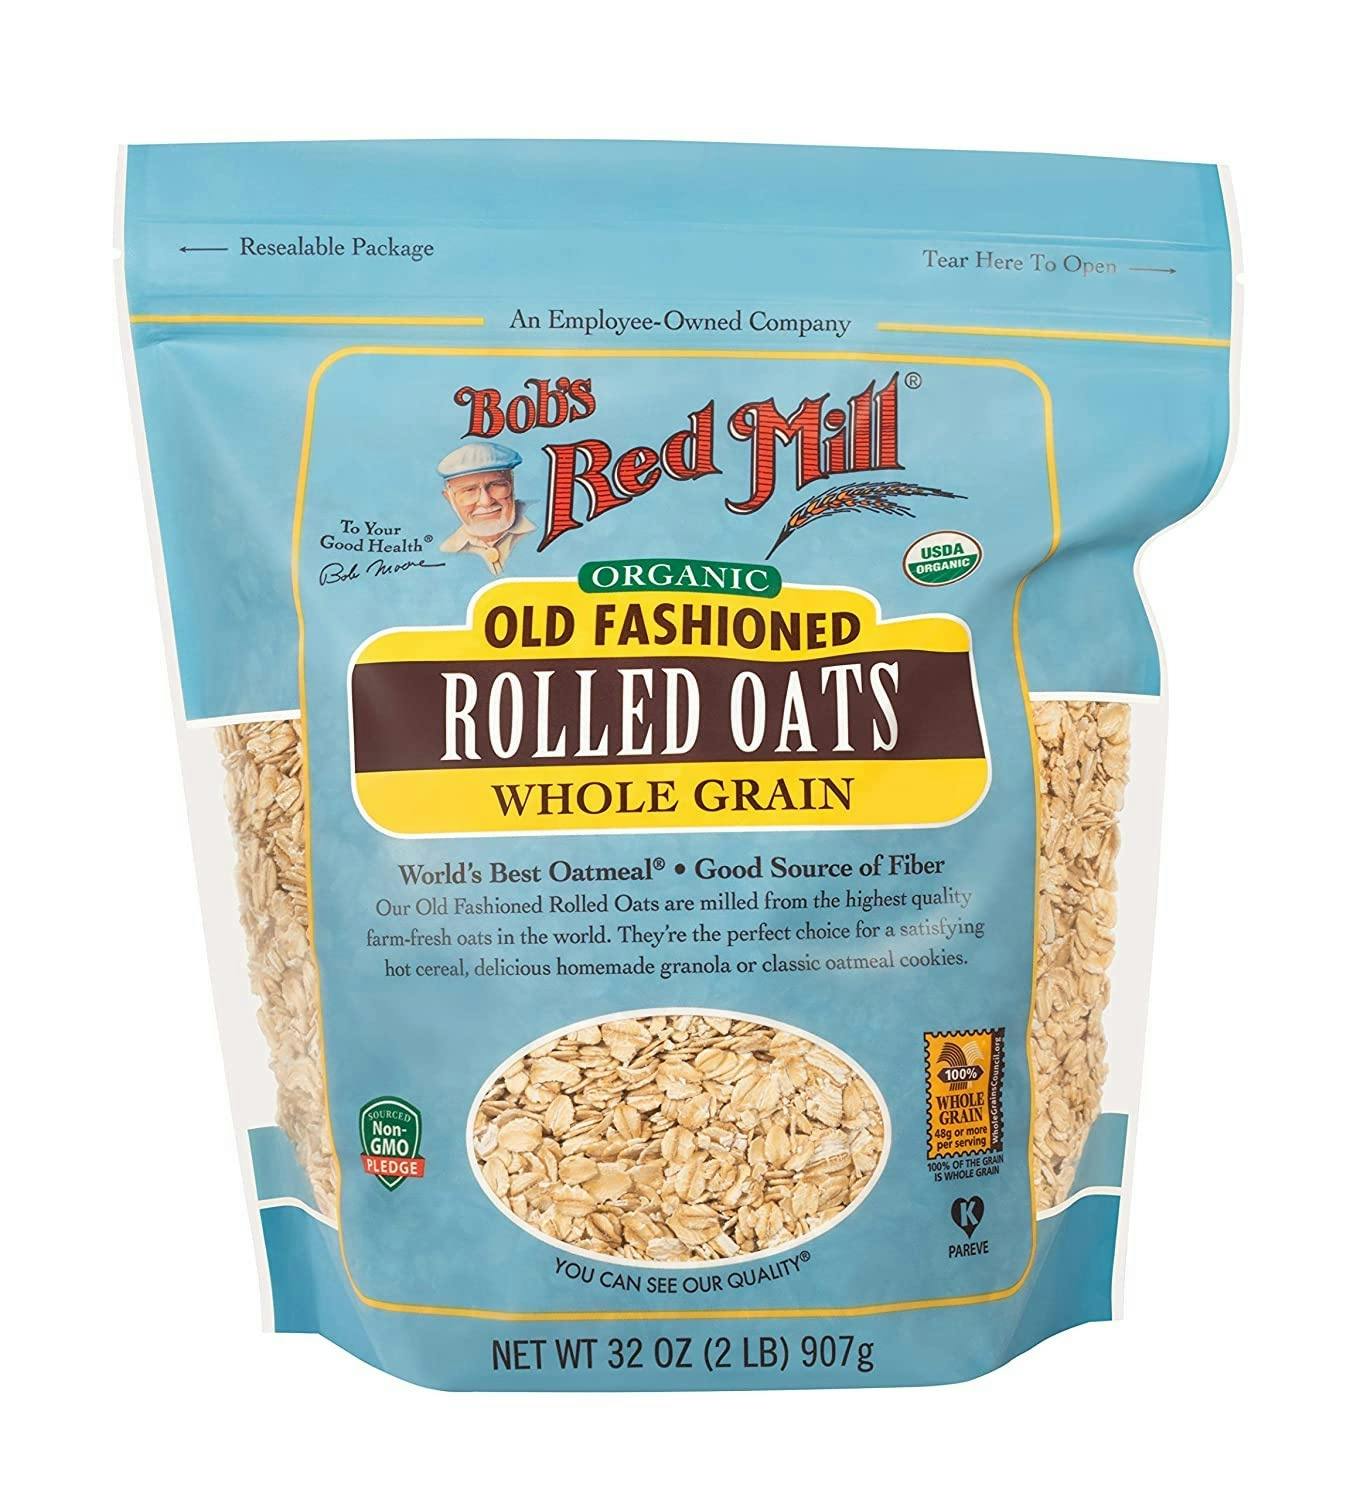 Bob's Red Mill Organic Whole Grain Old Fashioned Oats